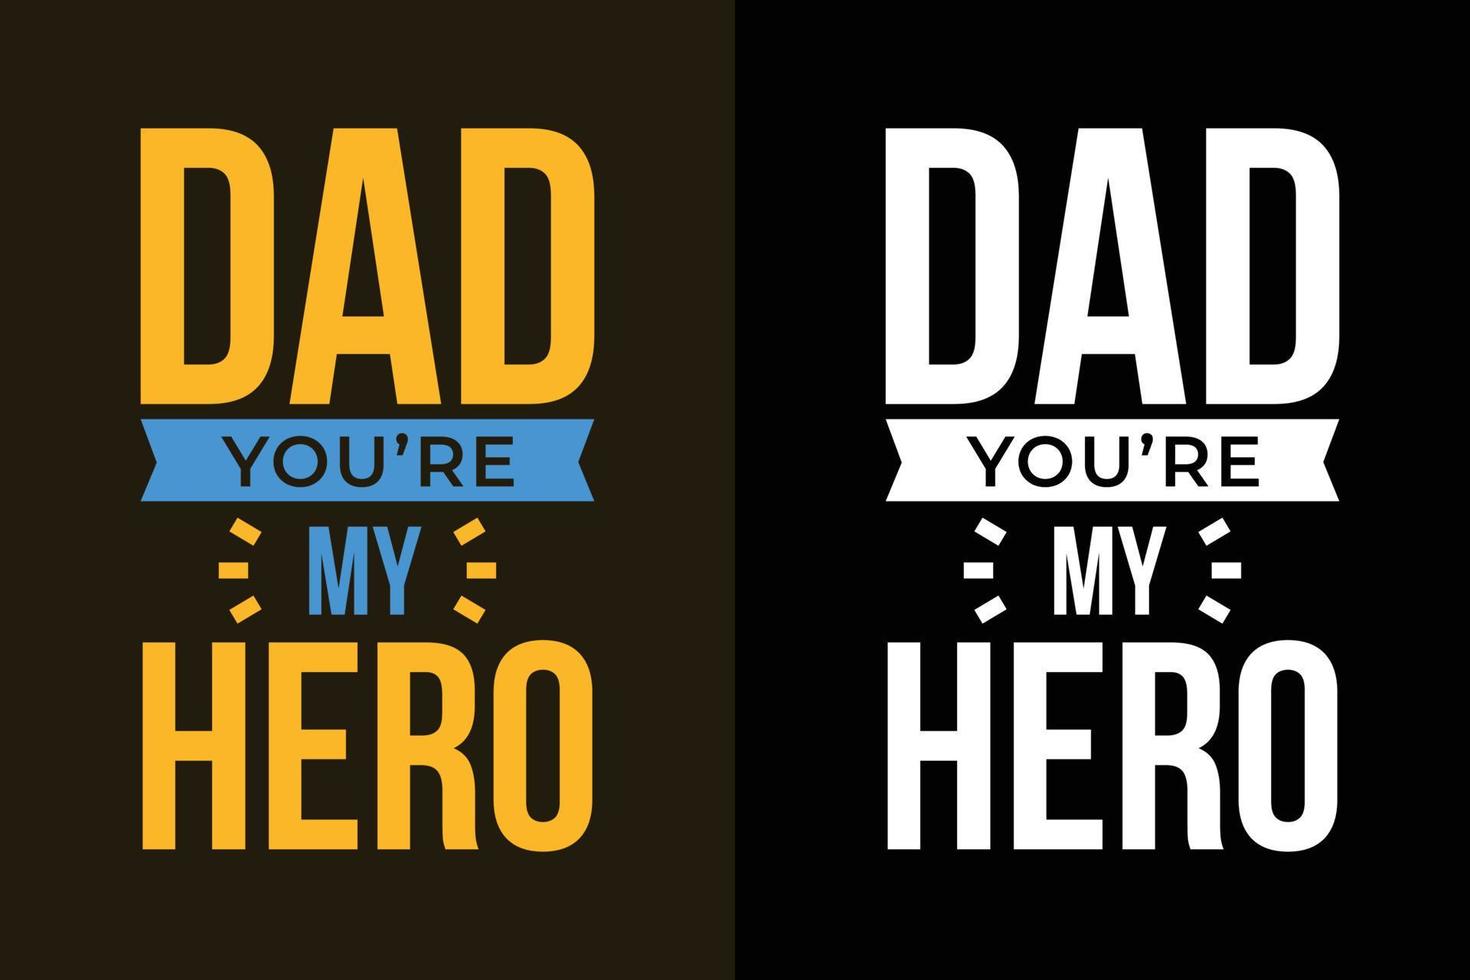 Dad you are my hero father's day or dad t shirt slogan quotes vector